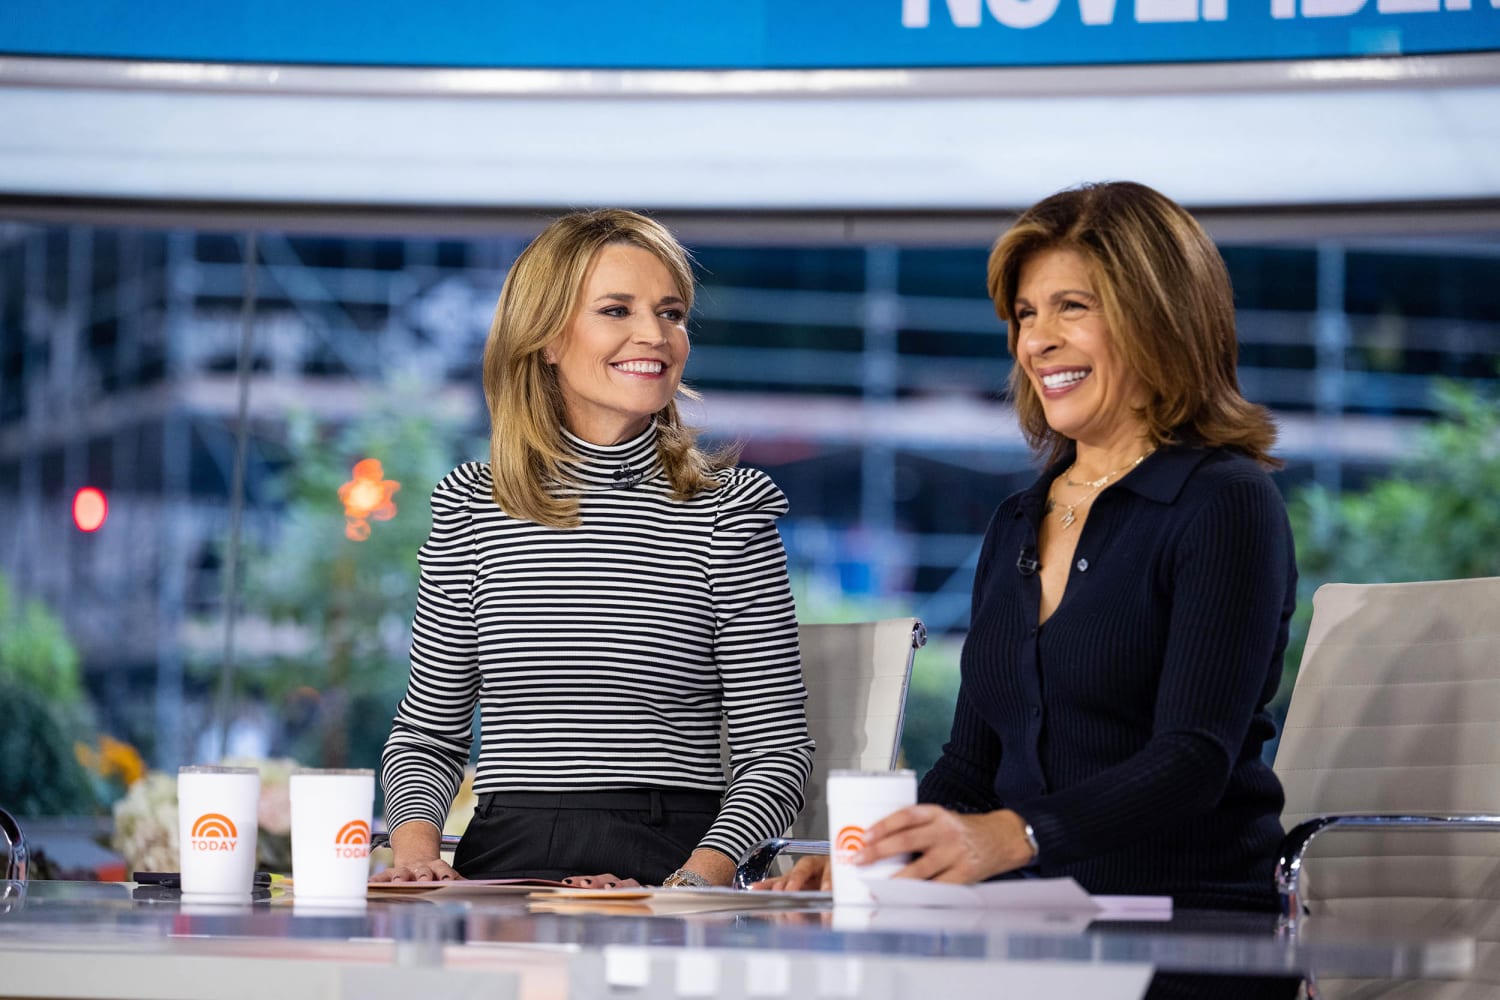 Hoda Kotb says Savannah Guthrie's new book helped her navigate a 'difficult' parenting moment